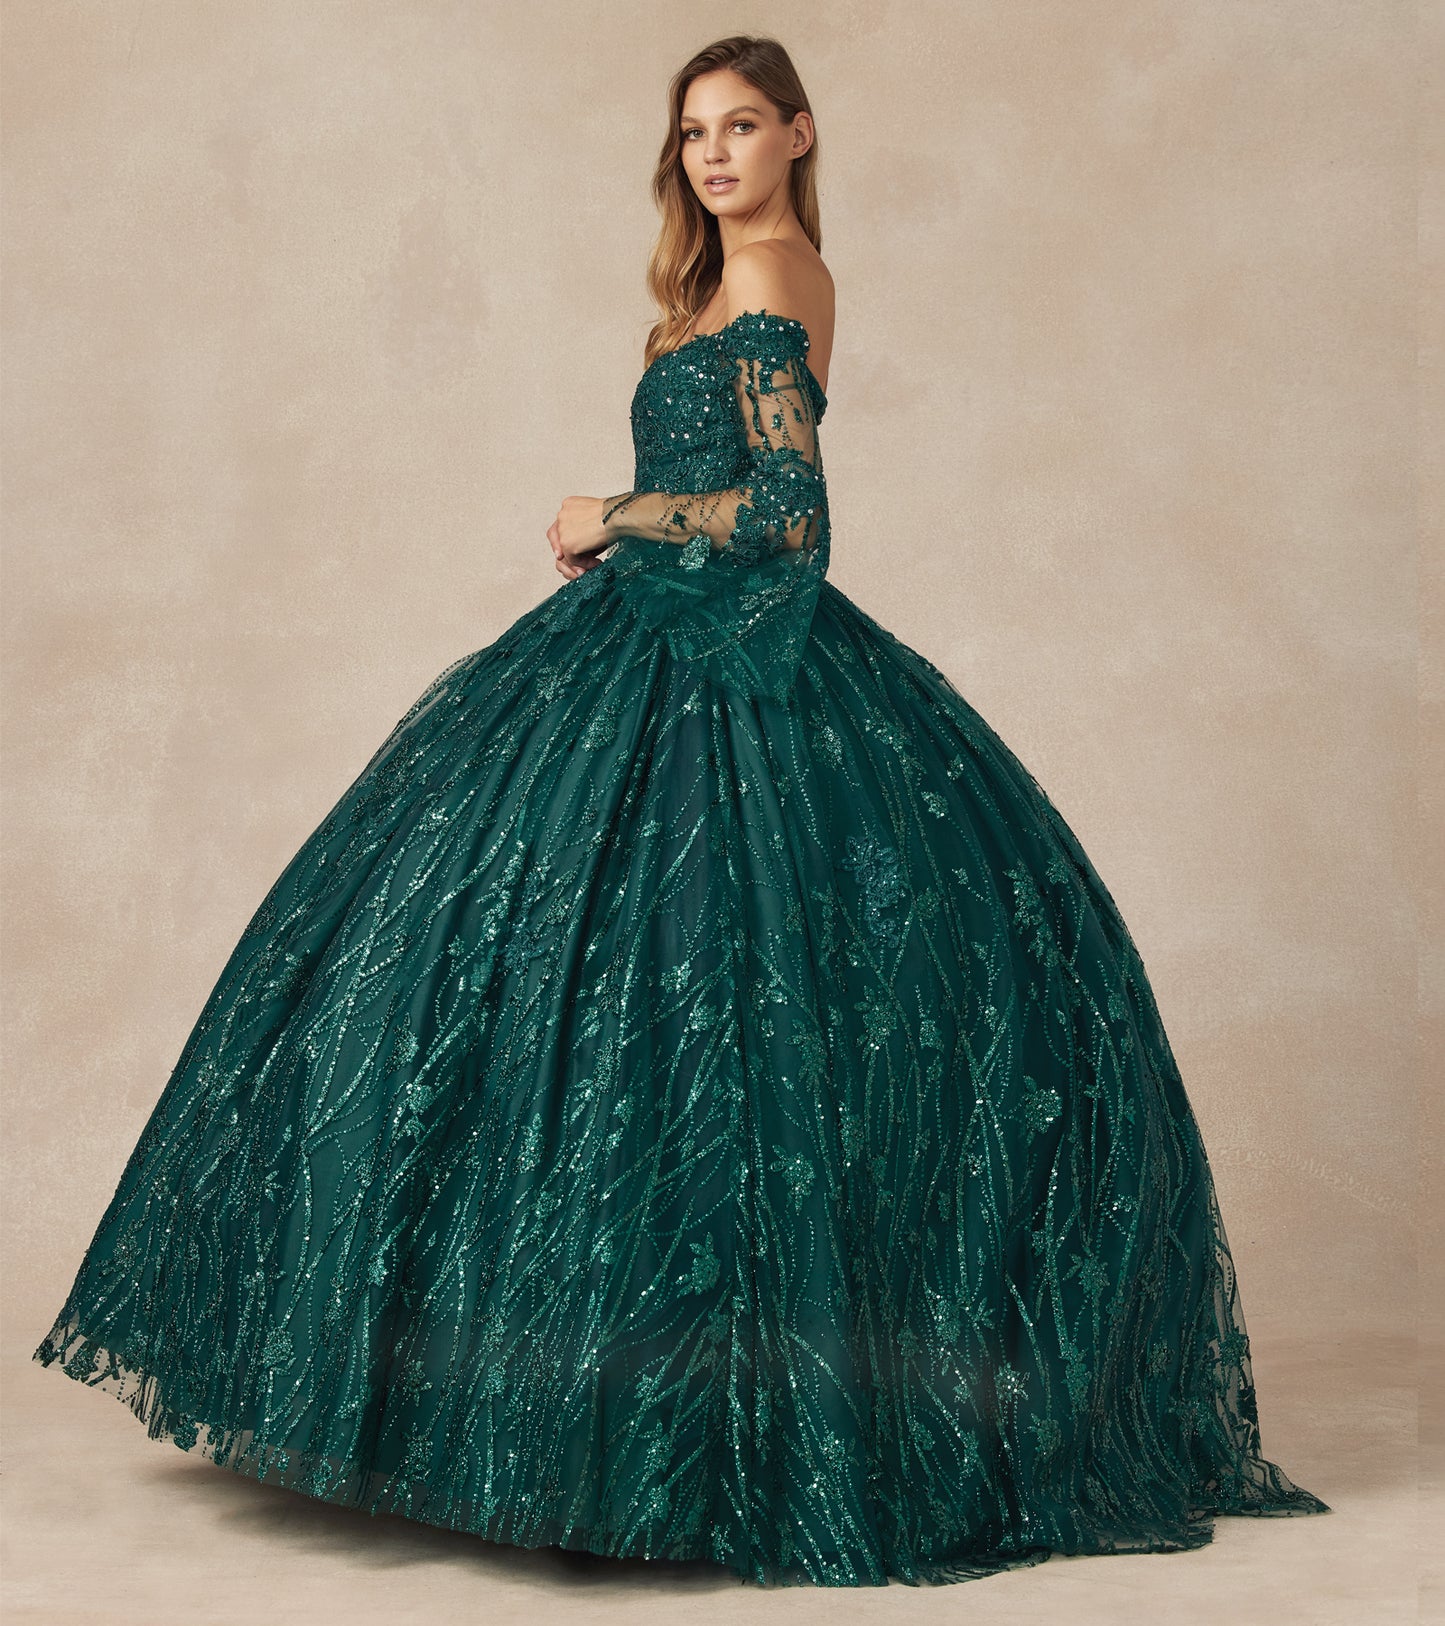 Fairytale Metallic Quince Dress with Bell Sleeves